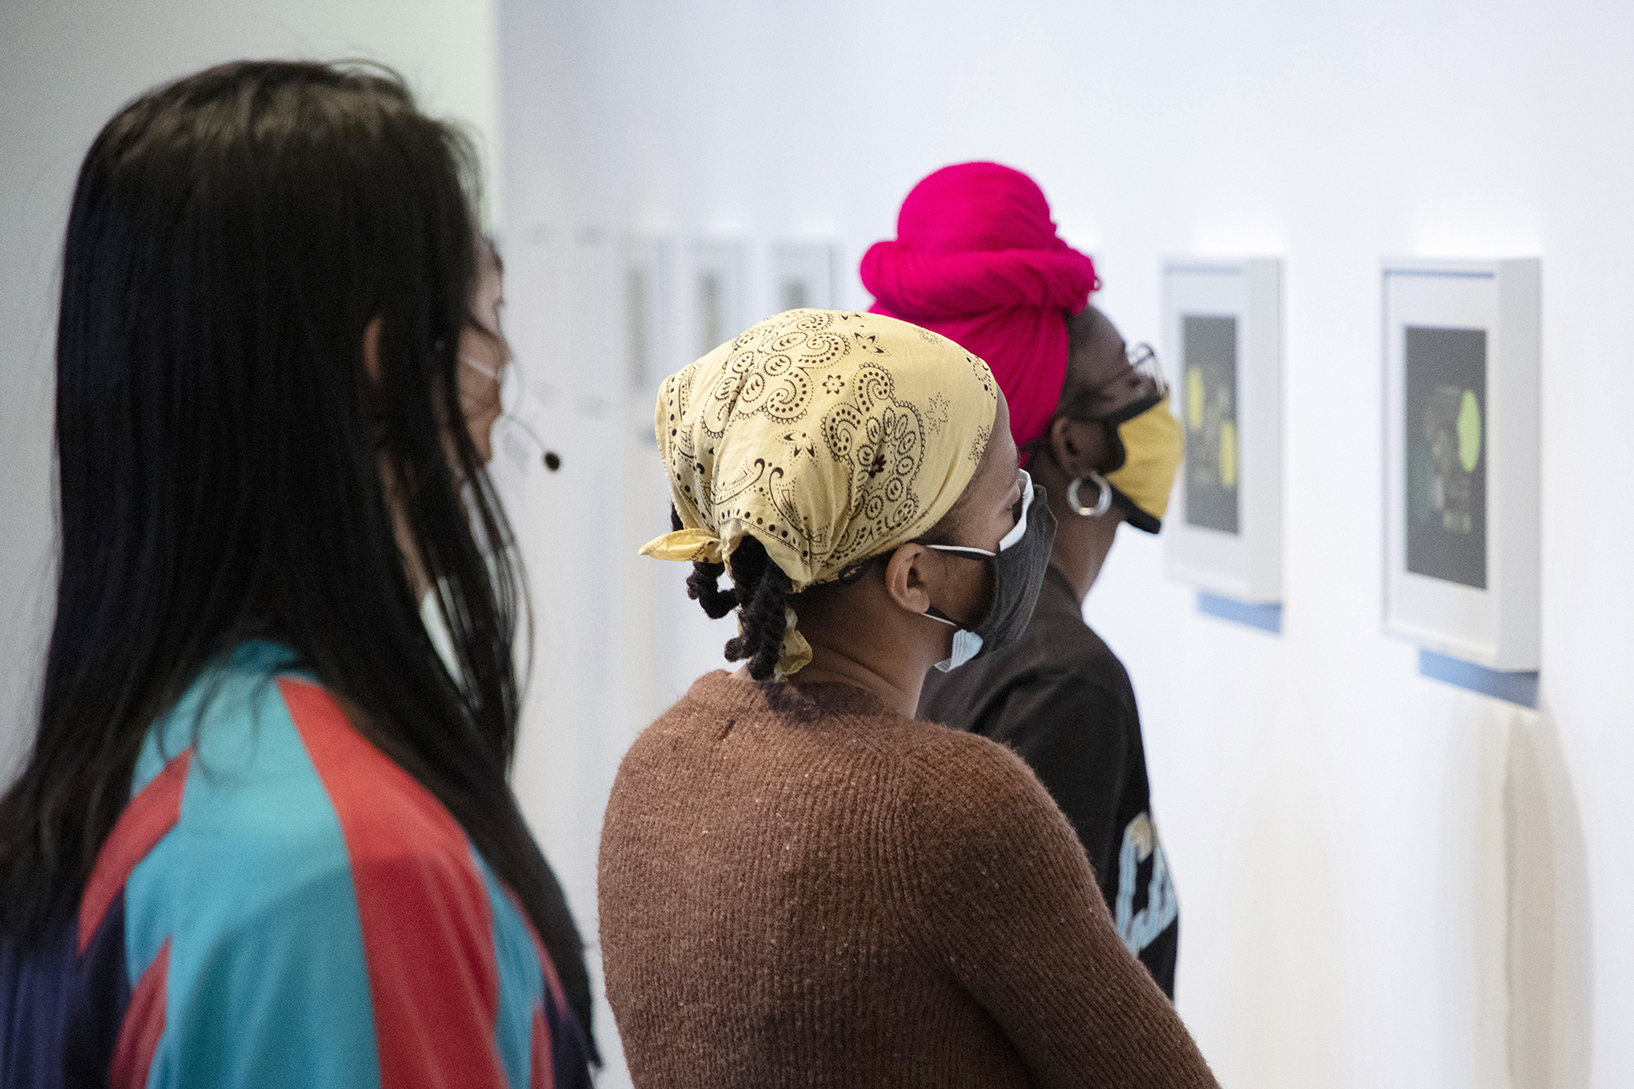 Students looking at framed works on paper